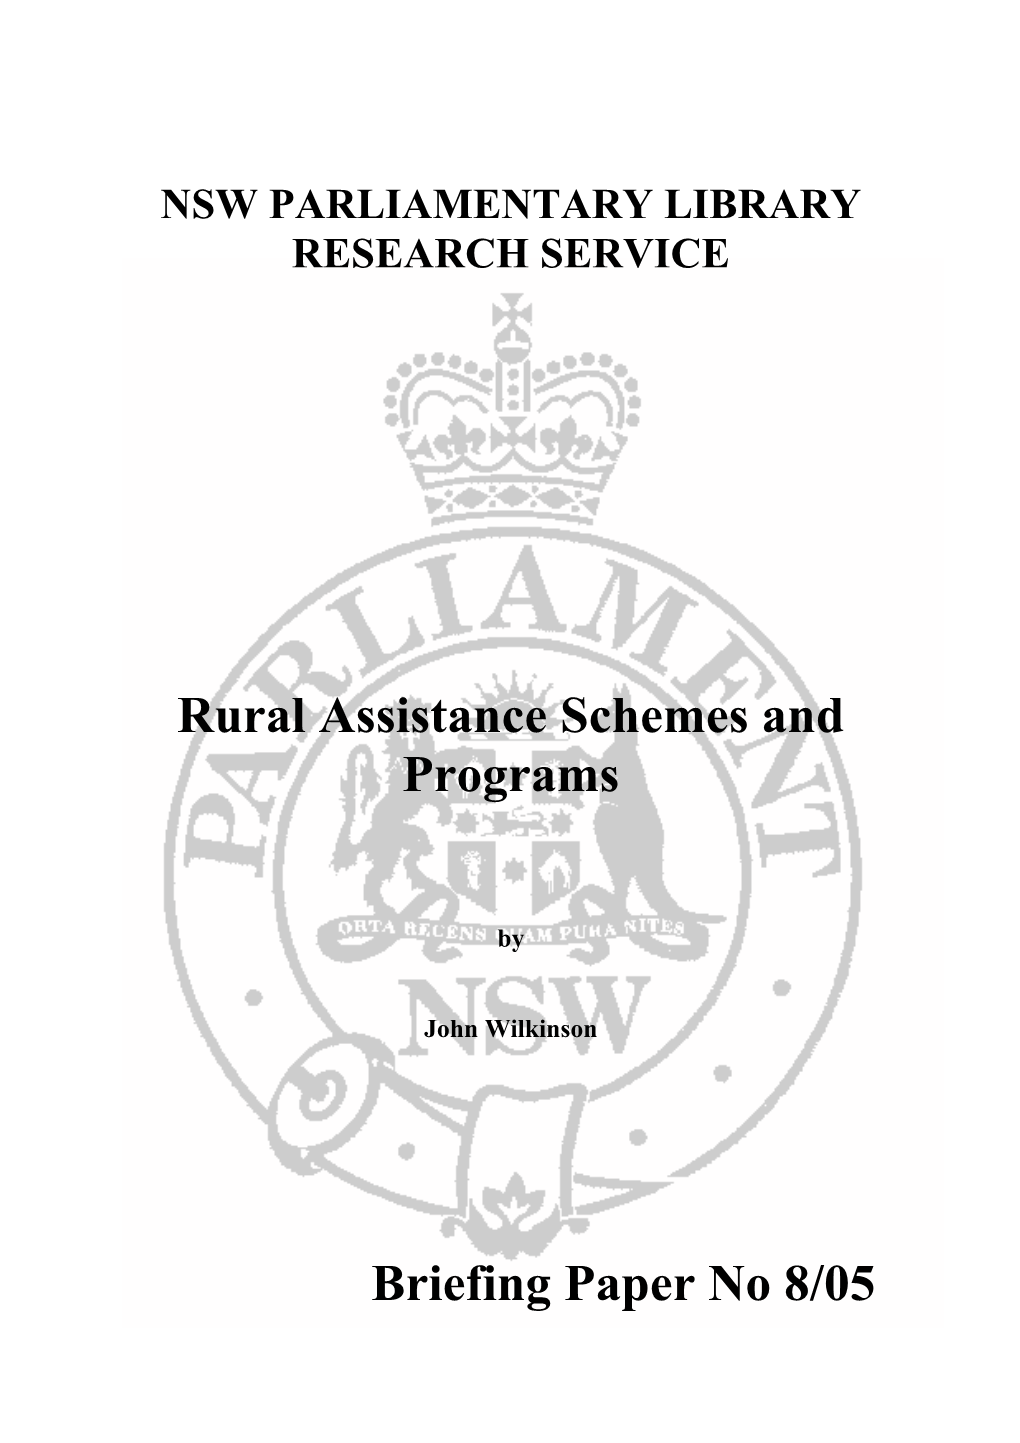 Rural Assistance Schemes and Programs Briefing Paper No 8/05